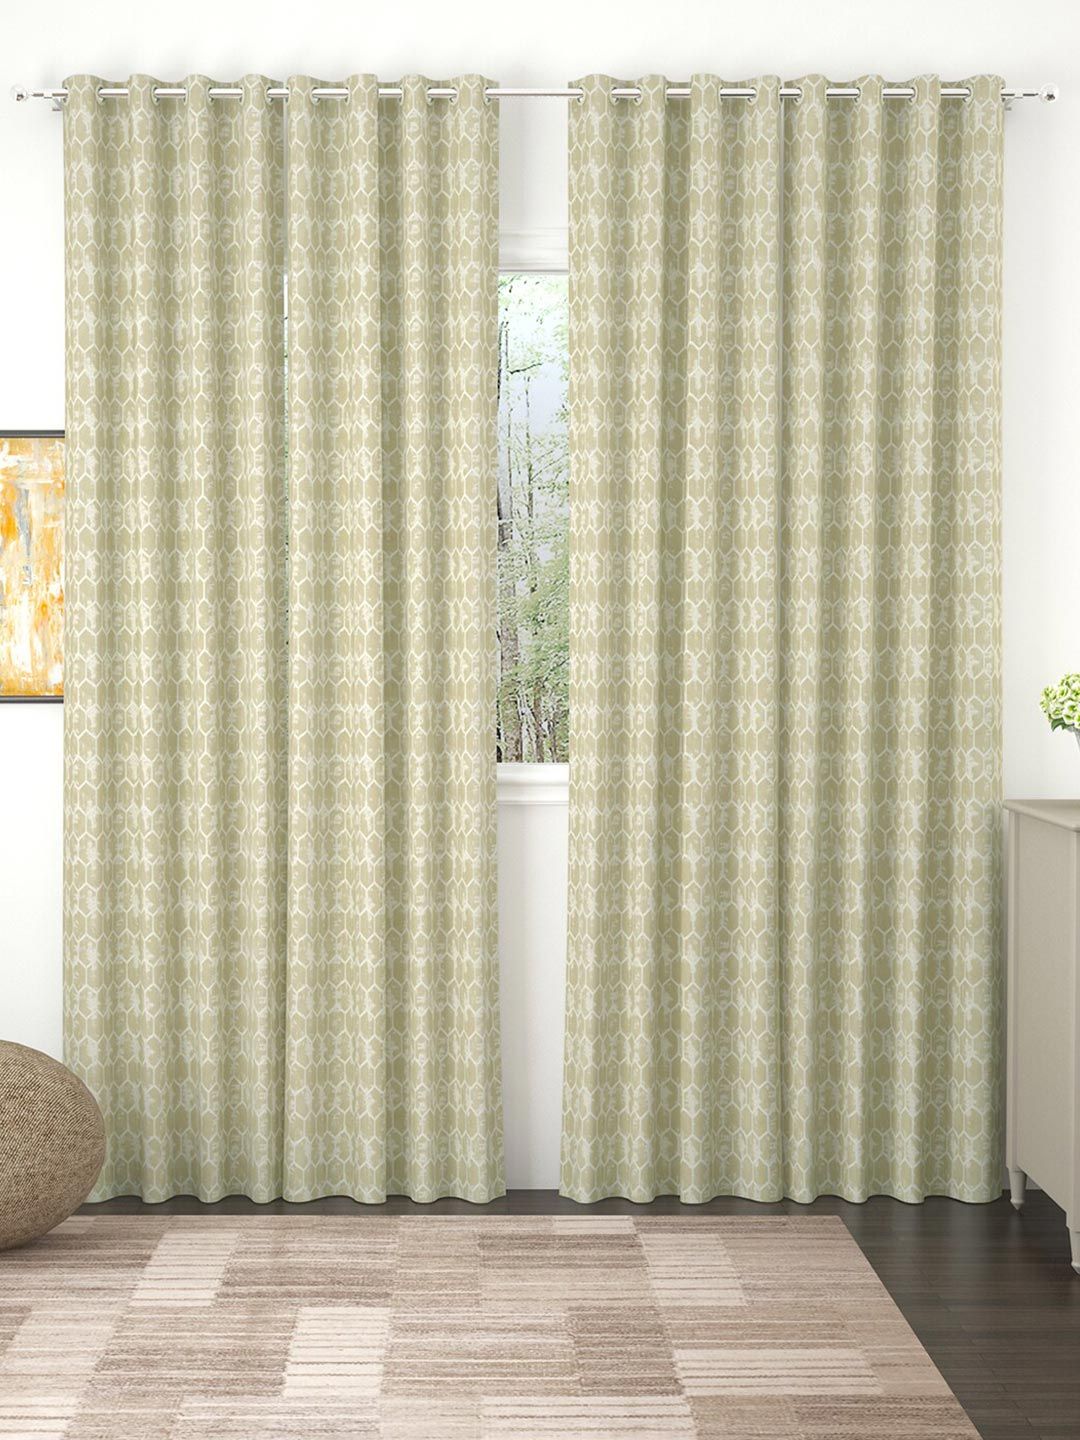 Story@home Unisex Beige Curtains and Sheers Price in India